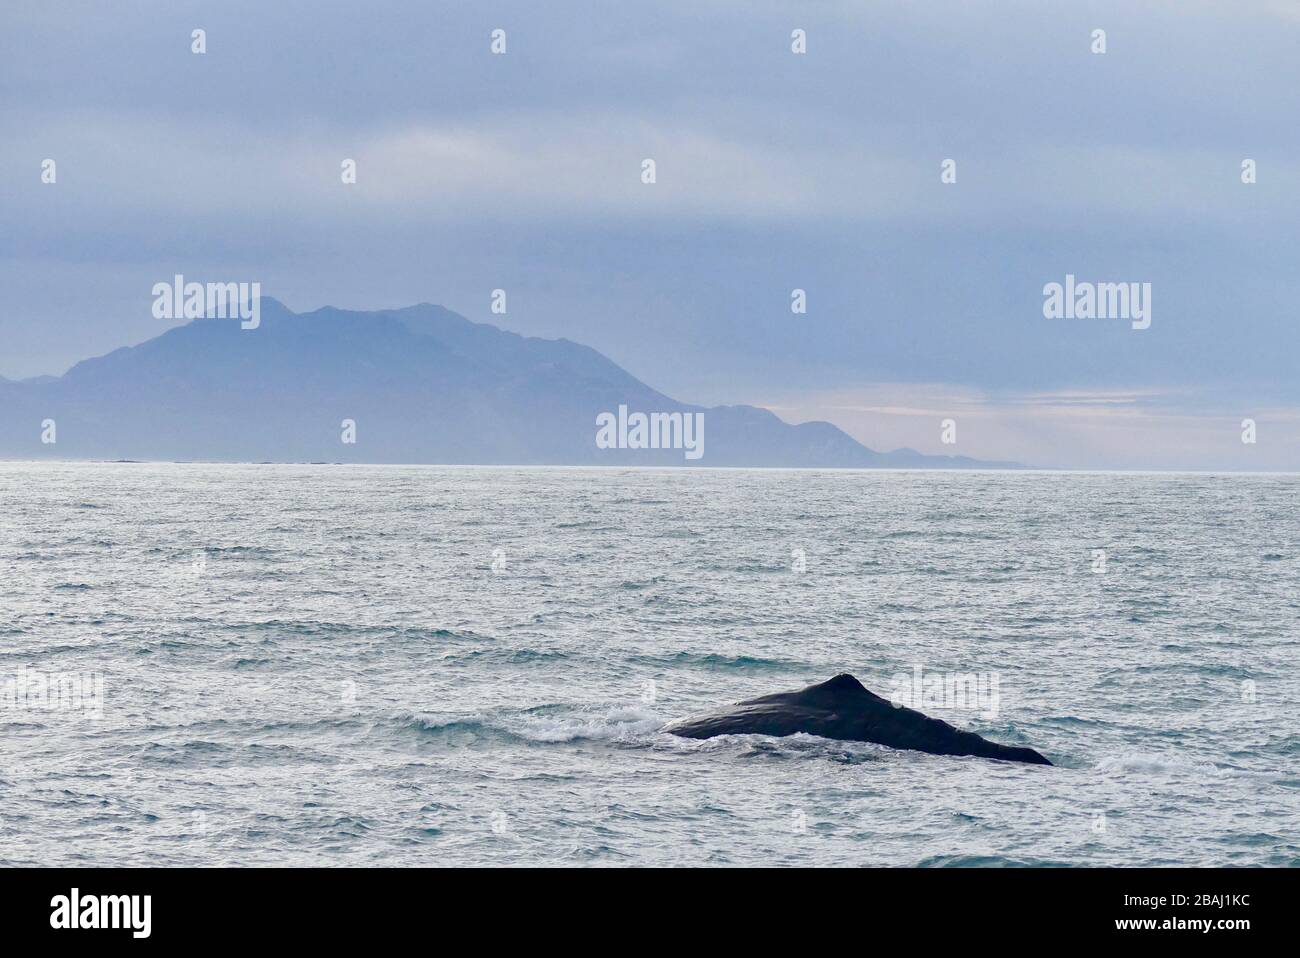 Sperm Whale (Physeter macrocephalus) diving off the coast of Kaikoura with mountains backdrop Stock Photo